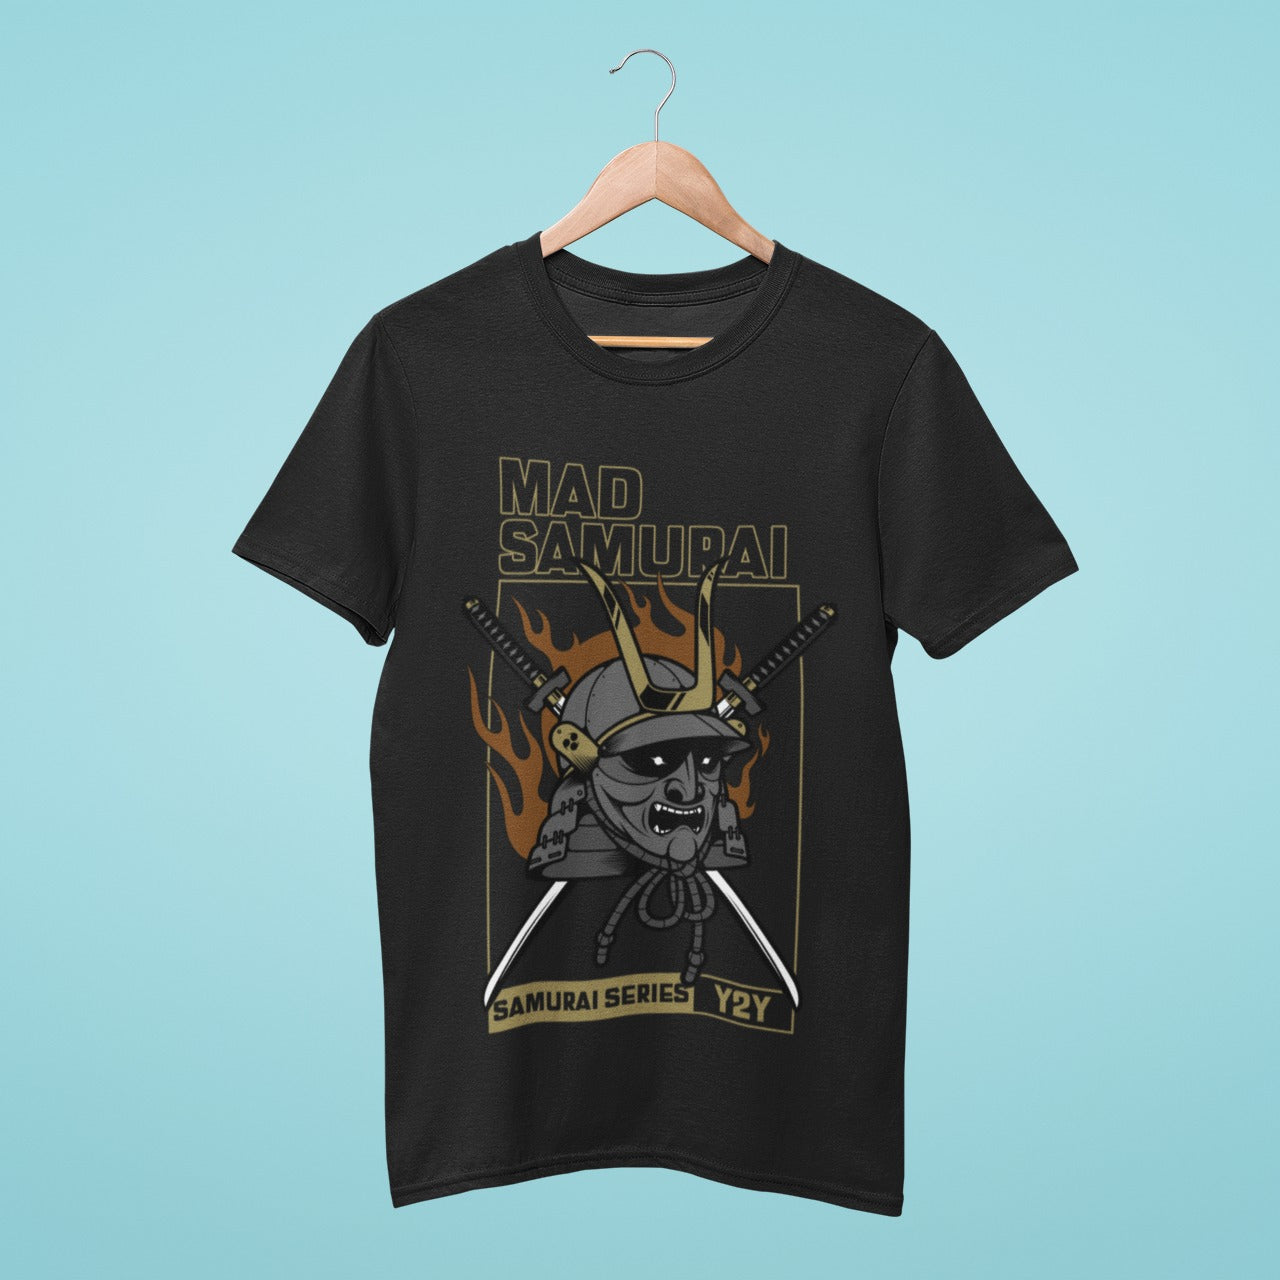 Get ready to make a bold statement with our black t-shirt featuring a burning samurai mask design and the title "Mad Samurai." Made with high-quality materials, this comfortable and durable t-shirt is perfect for fans of samurai culture and those who love edgy and unique designs. Order now and add this distinctive and eye-catching t-shirt to your collection!